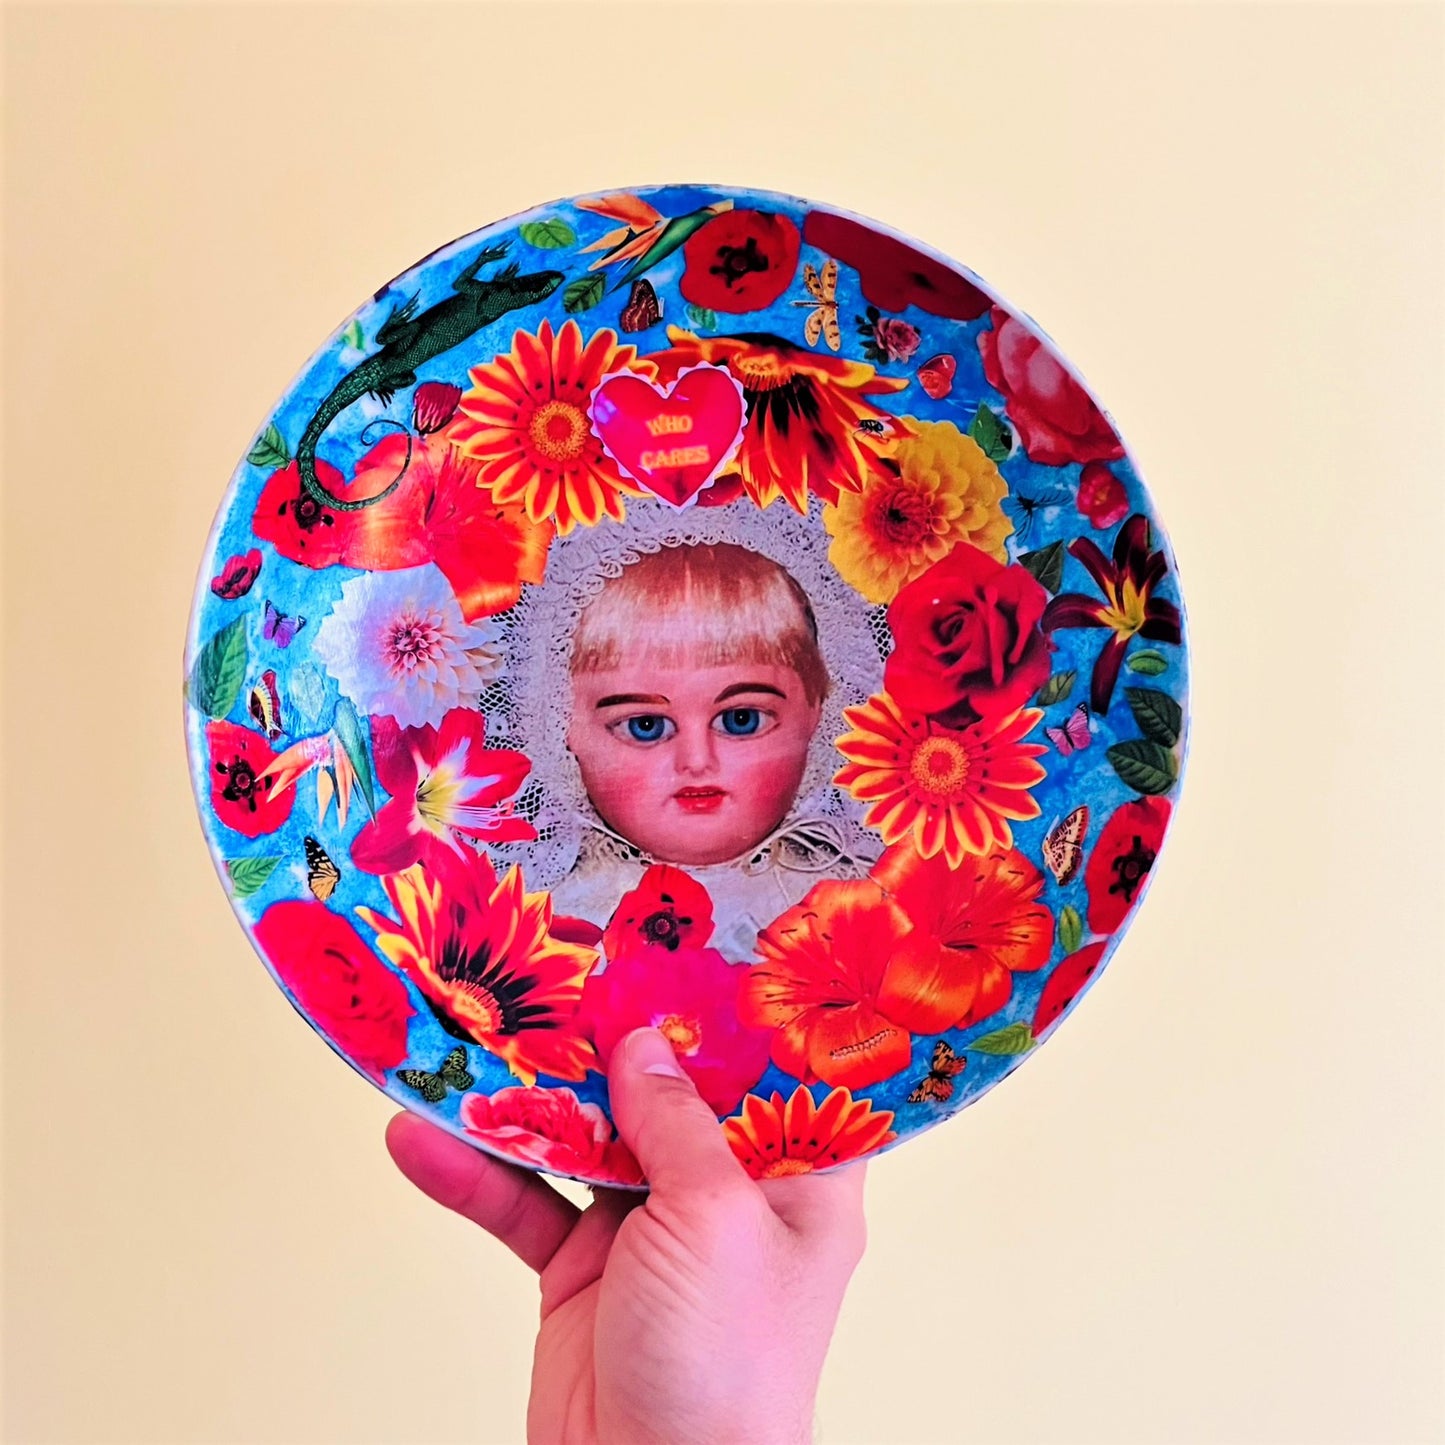 "Who Cares" Wall Plate by House of Frisson, featuring a vintage doll surrounded by flowers, moths, and a lizard, on a blue background. Holding the plate.